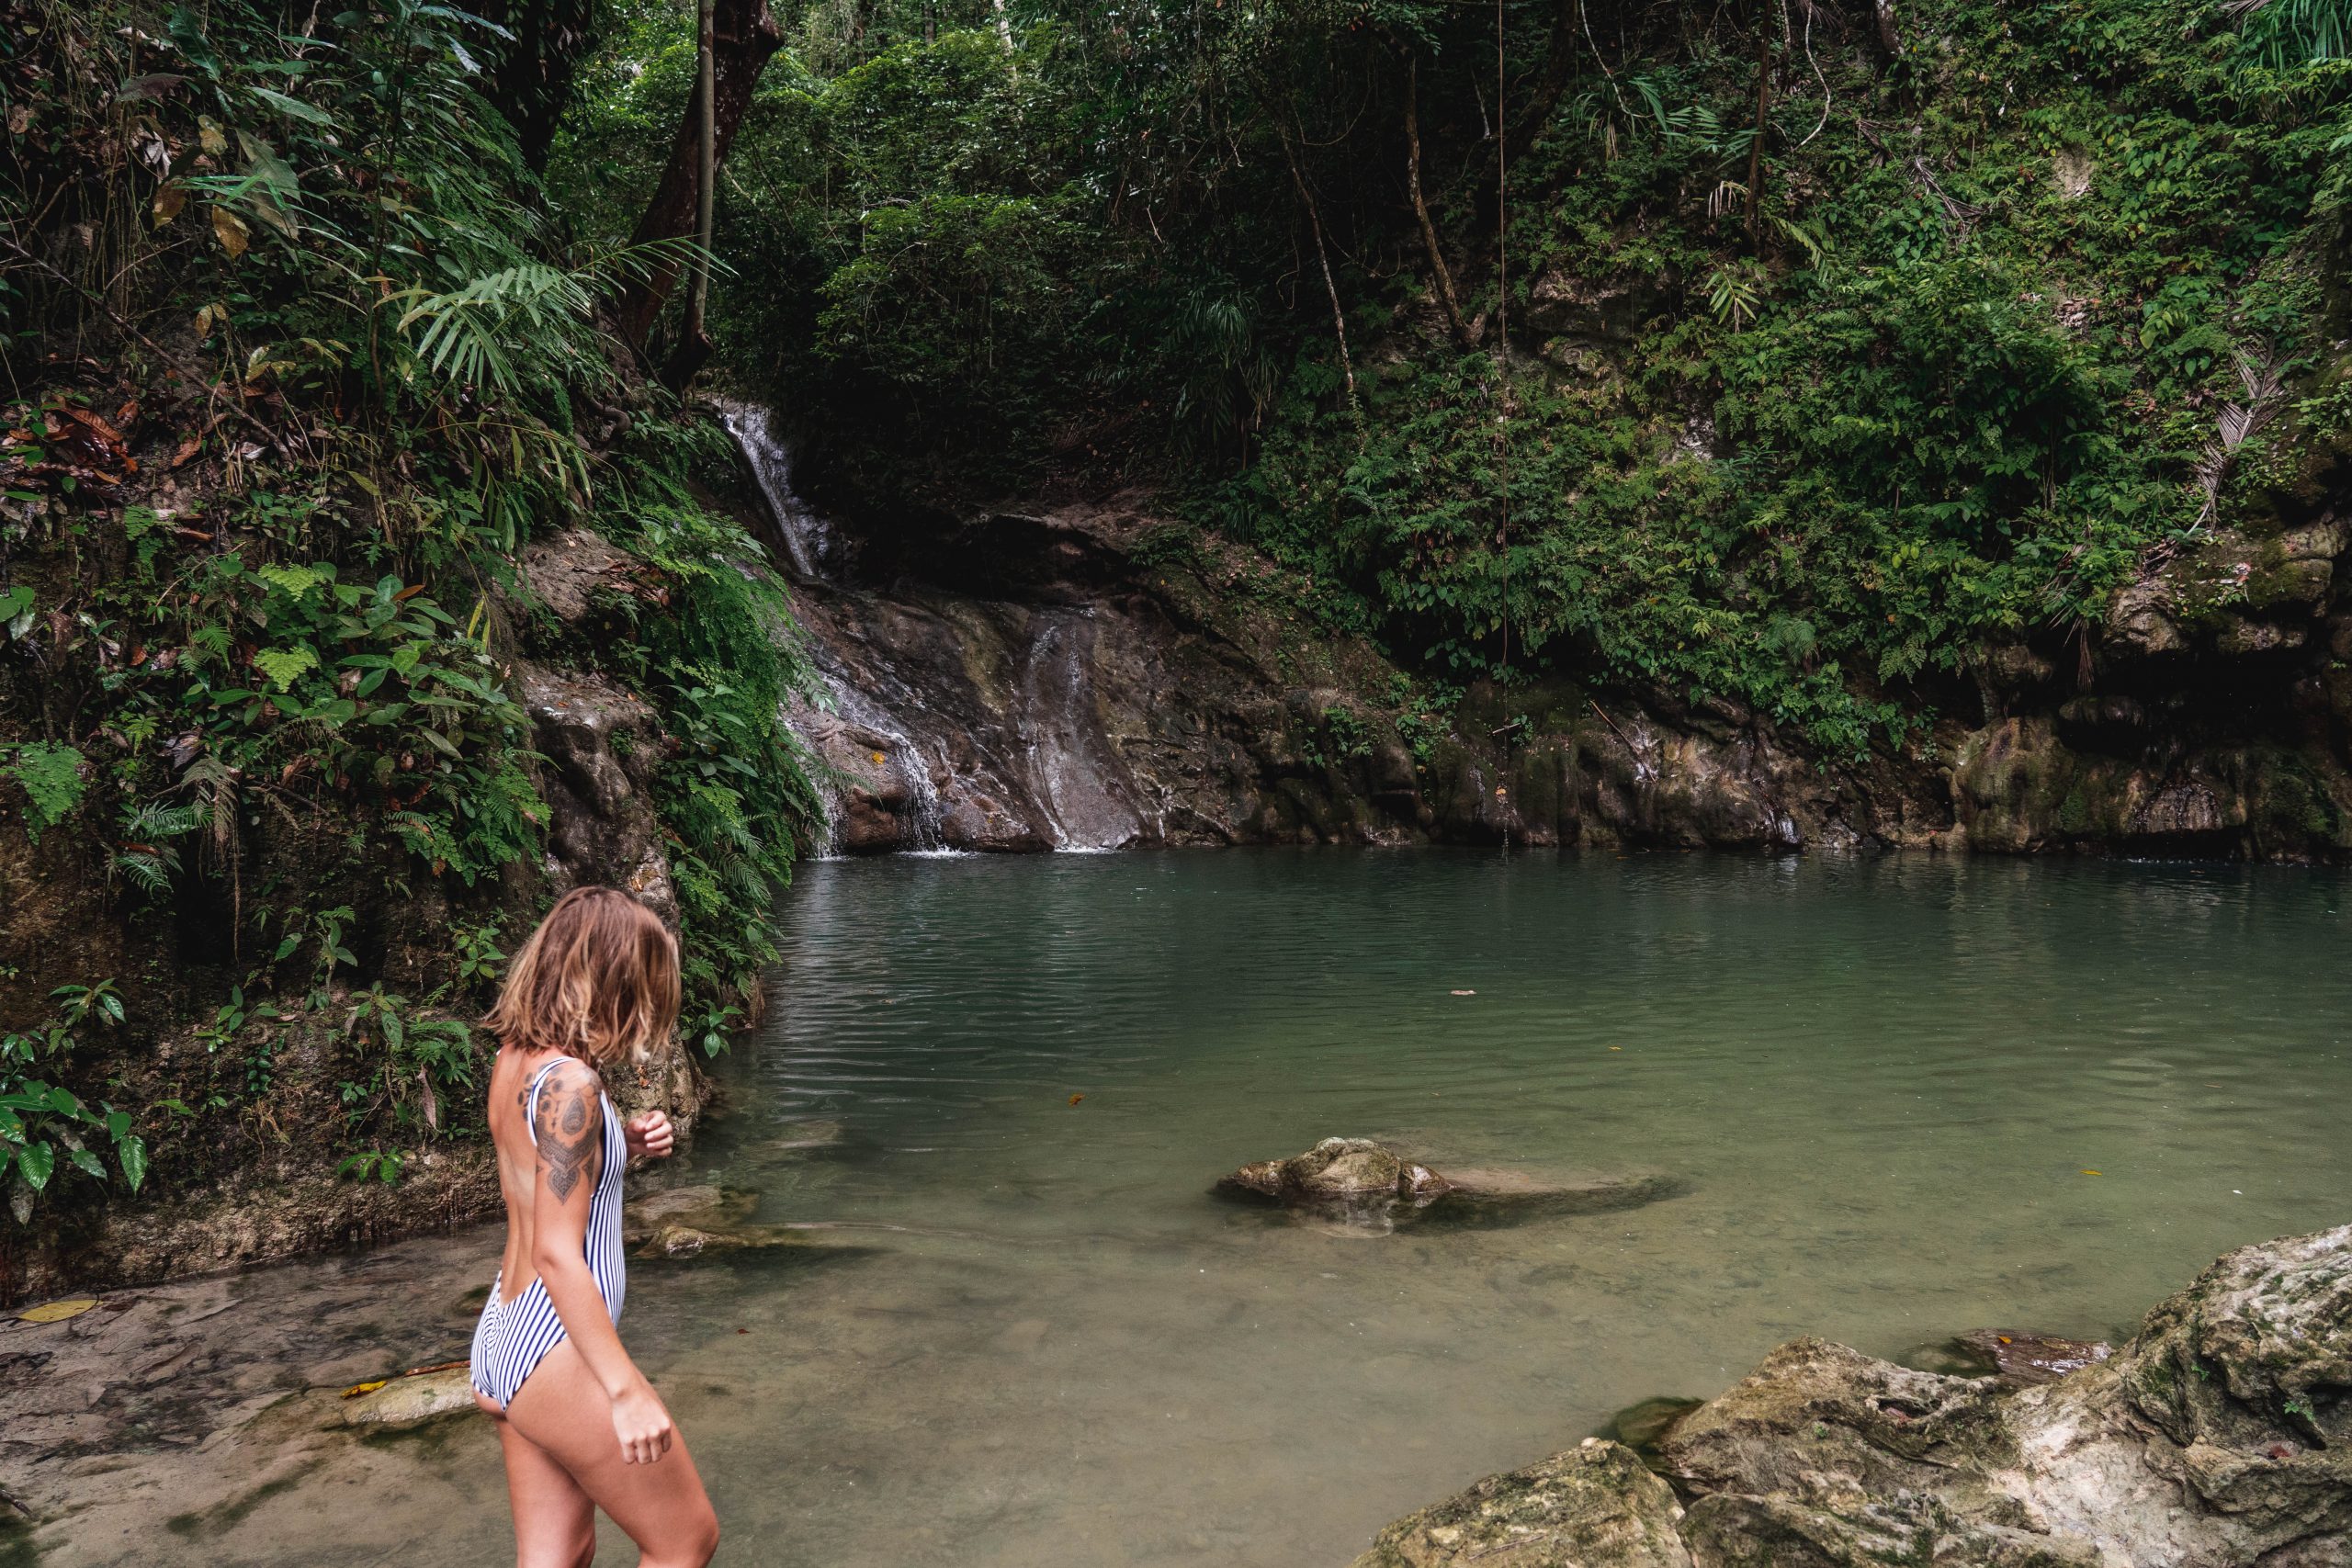 The Complete Guide To Bohol - What To Do, Where To Stay + Budget